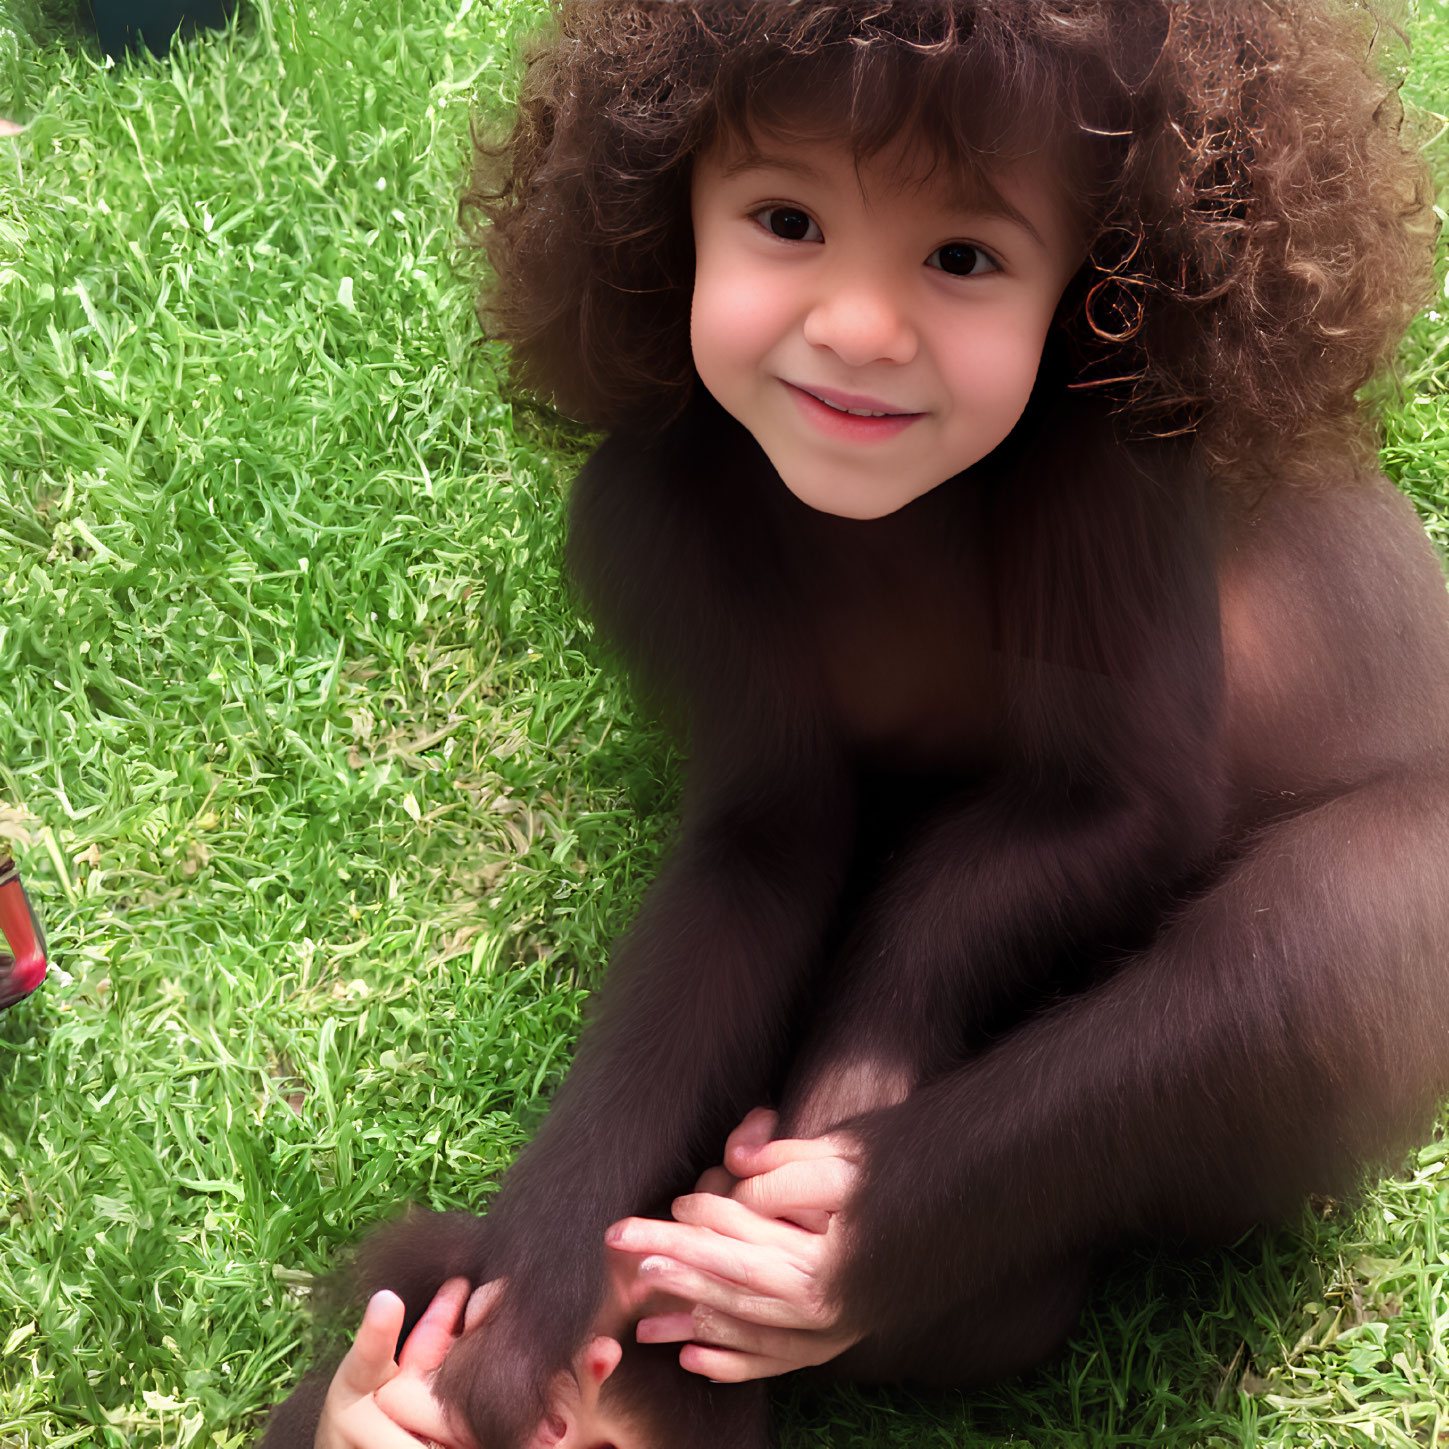 Curly-Haired Child Smiling on Grass with Digitally Added Monkey Body